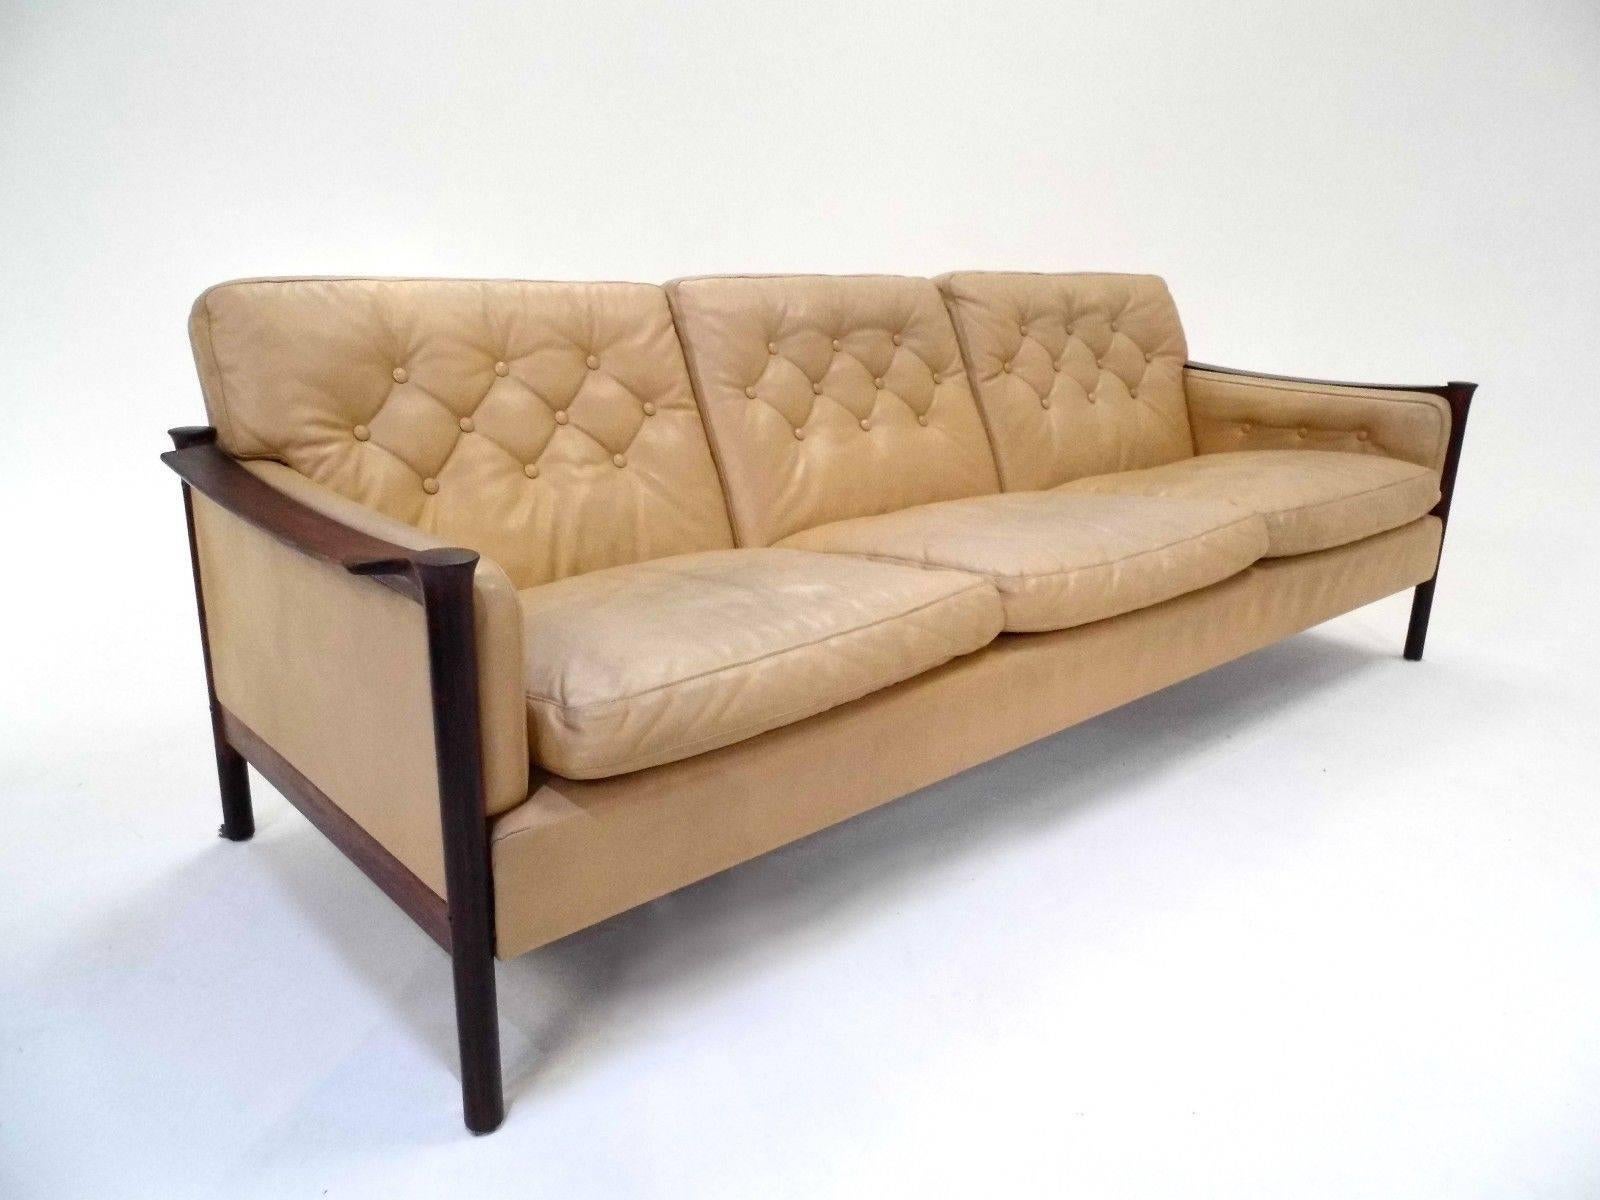 A beautiful Norwegian cream leather and rosewood three-seat sofa designed by Torbjørn Afdal, this would make a stylish addition to any living or work area. The sofa has buttoned cushions and sculptured armrests for enhanced comfort. A striking piece